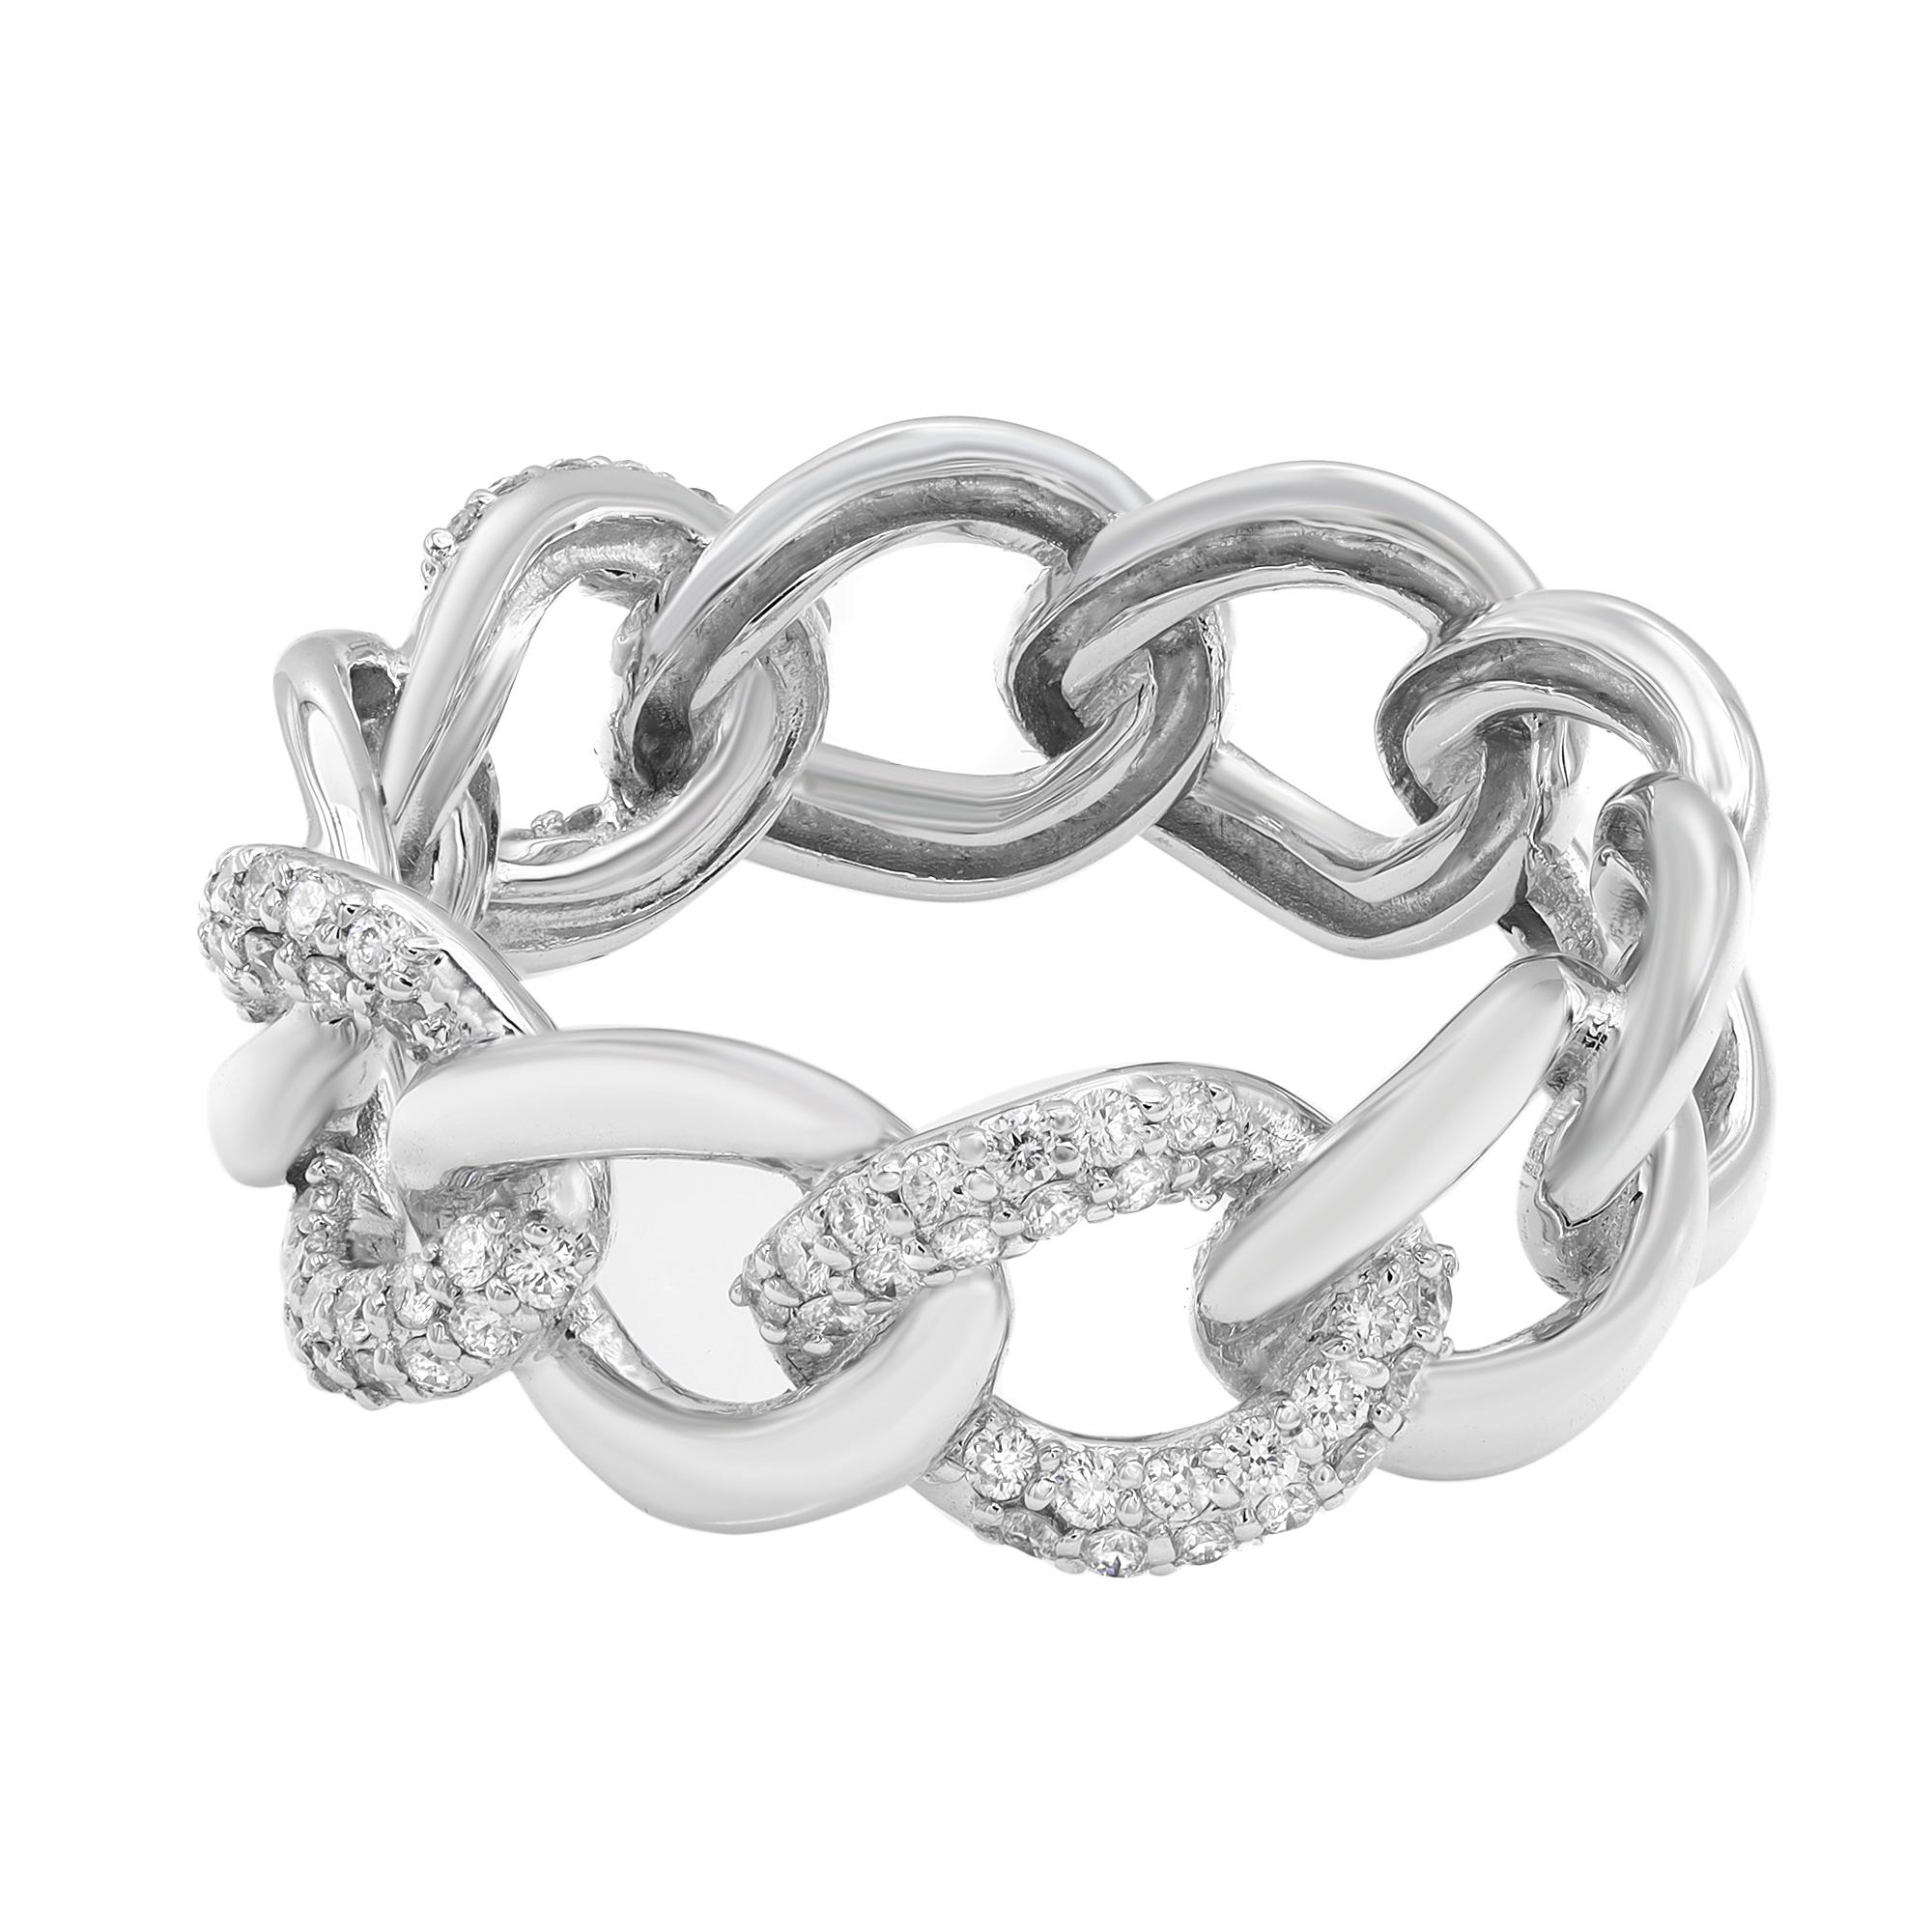 This classic yet elegant chain link ring band features pave set round brilliant cut diamonds encrusted in three links. Crafted in high polished 18k white gold. Total diamond weight: 0.39Cttw. Diamond quality: Color G-H and Clarity VS-SI. Ring size: